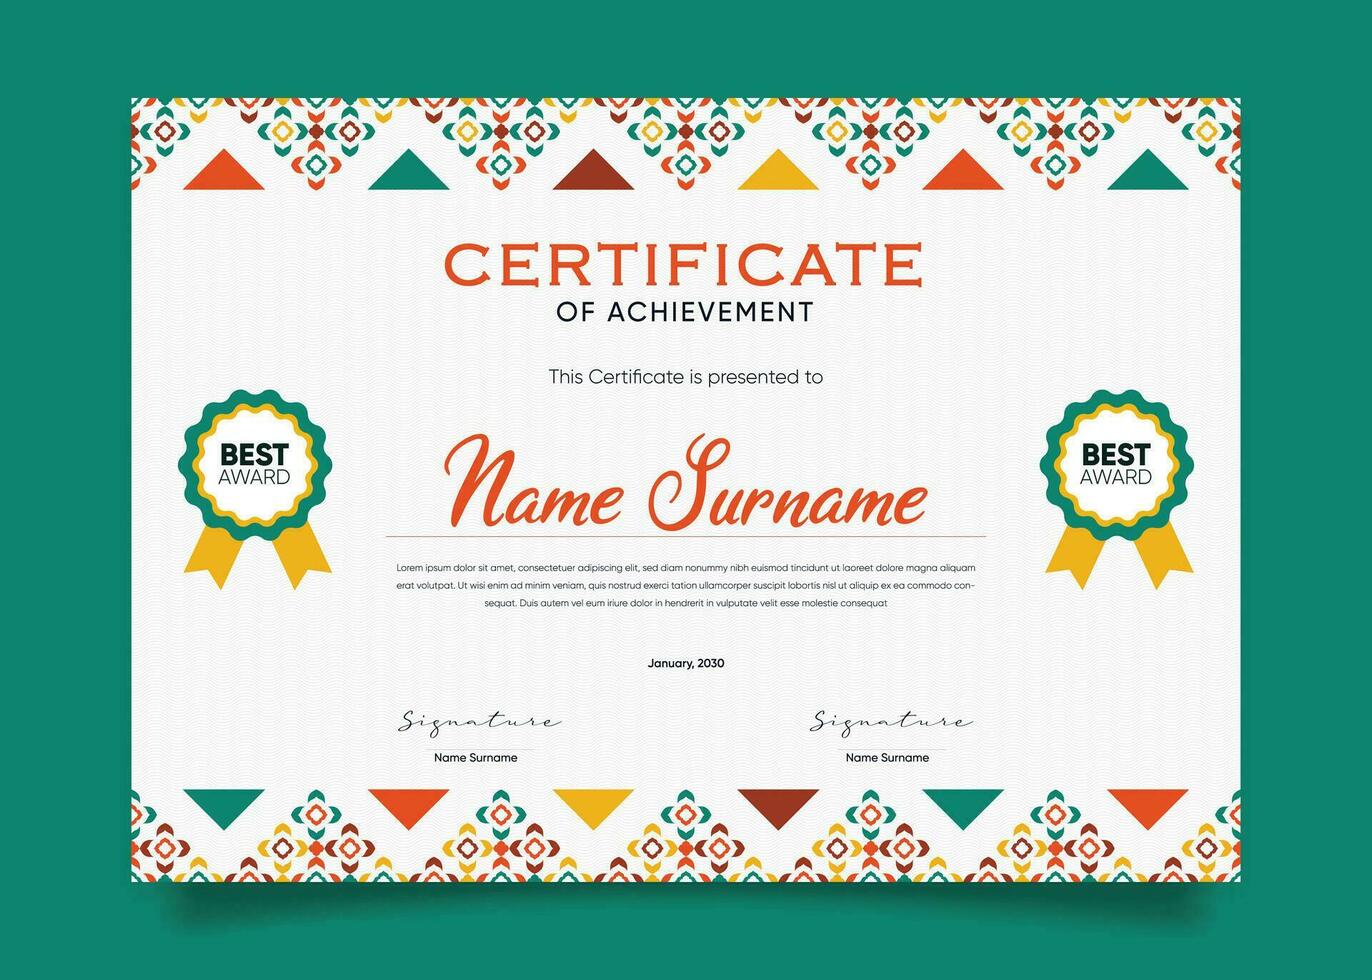 Appreciation and Achievement Certificate Template Design. Clean modern abstracts, ornaments, and certificates. Diploma Certificate vector template, certificate of achievement with badge.